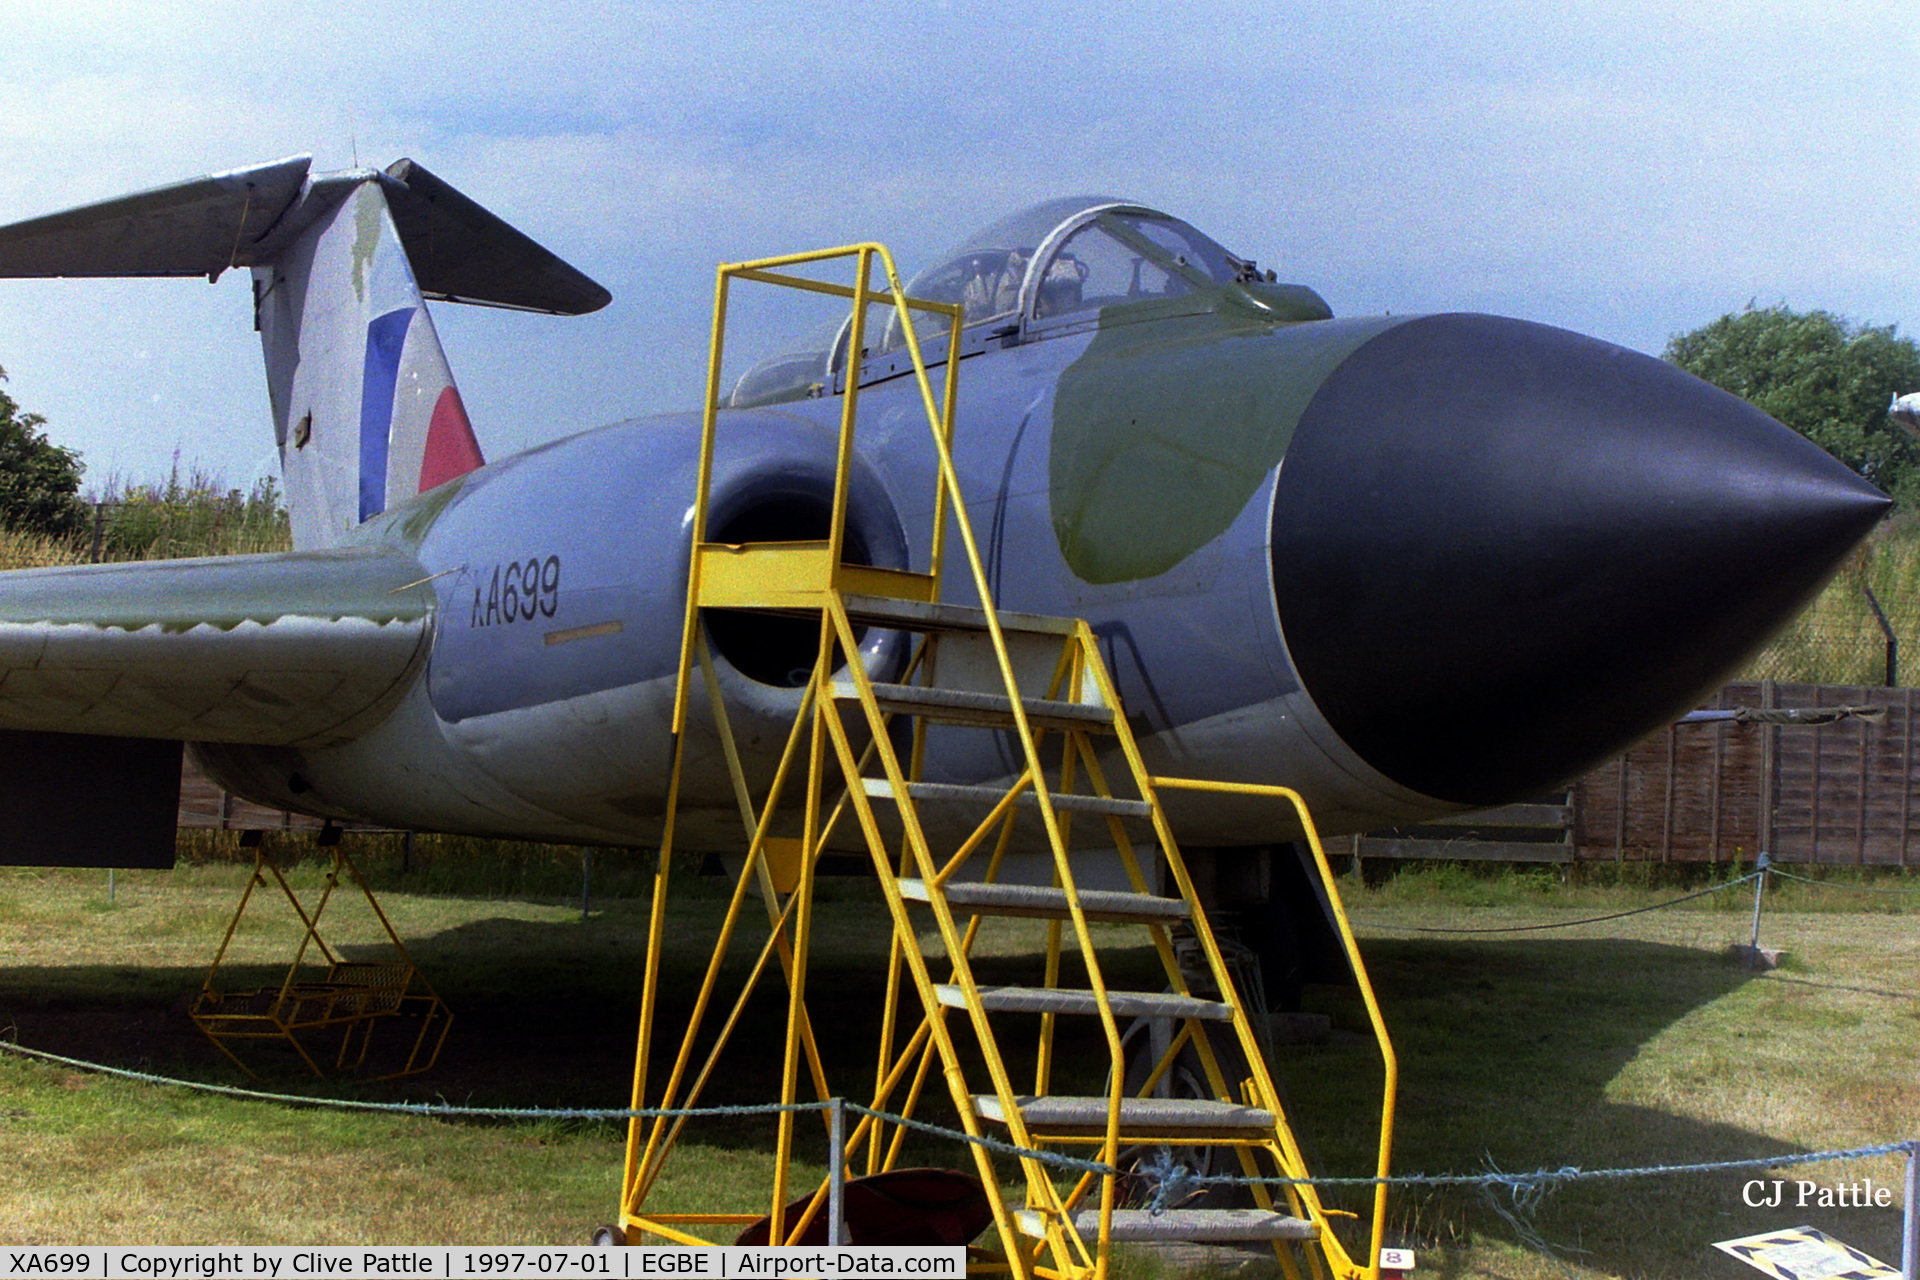 XA699, 1957 Gloster Javelin FAW.5 C/N Not found XA699, On display at the Midland Air Museum, Coventry, in July 1997.